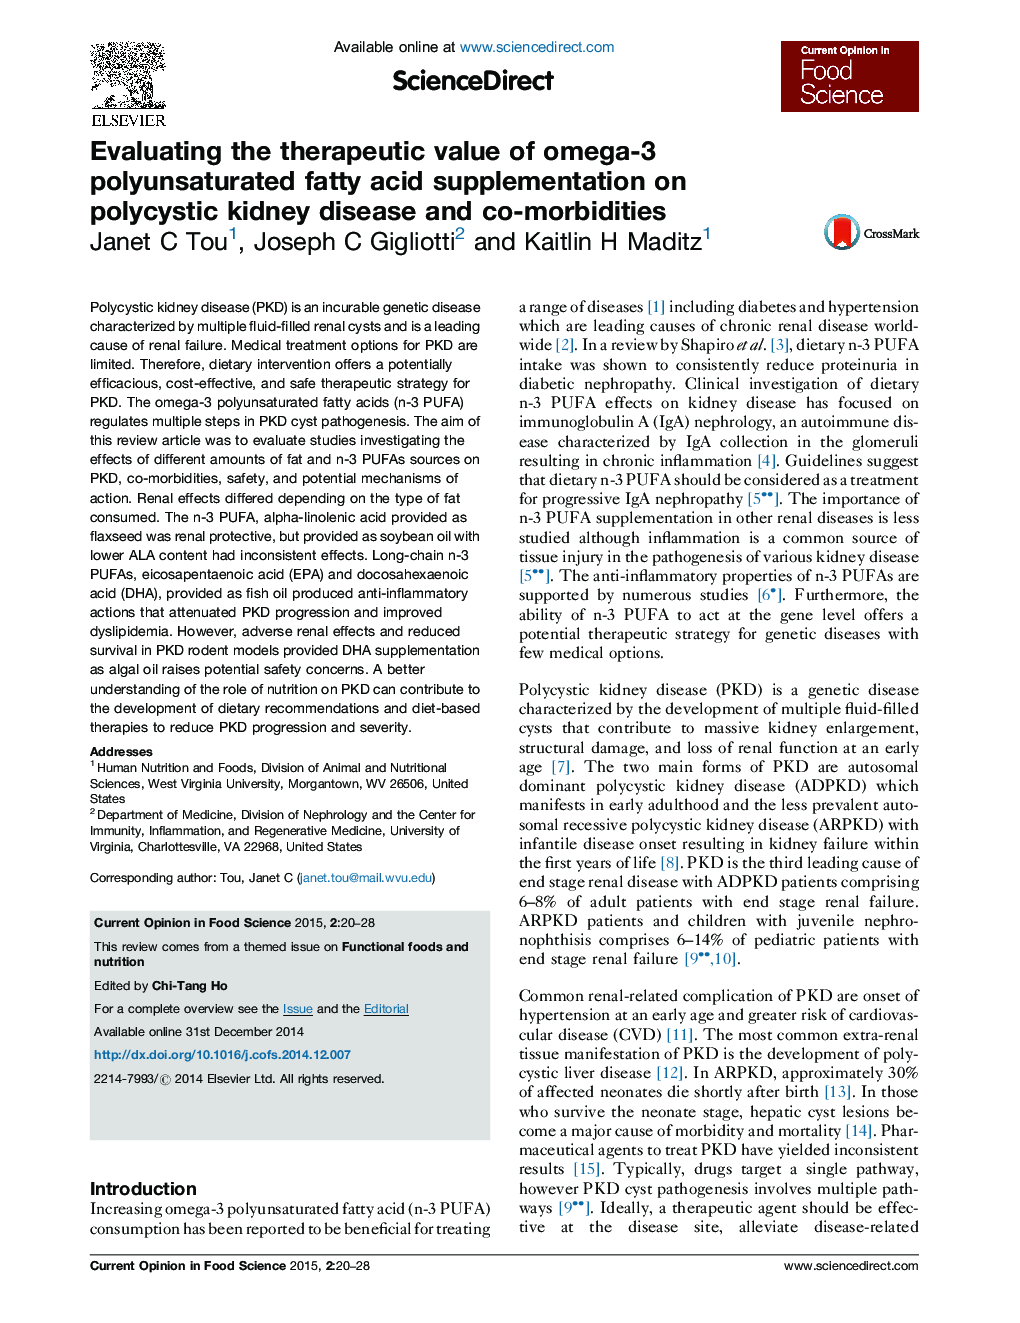 Evaluating the therapeutic value of omega-3 polyunsaturated fatty acid supplementation on polycystic kidney disease and co-morbidities